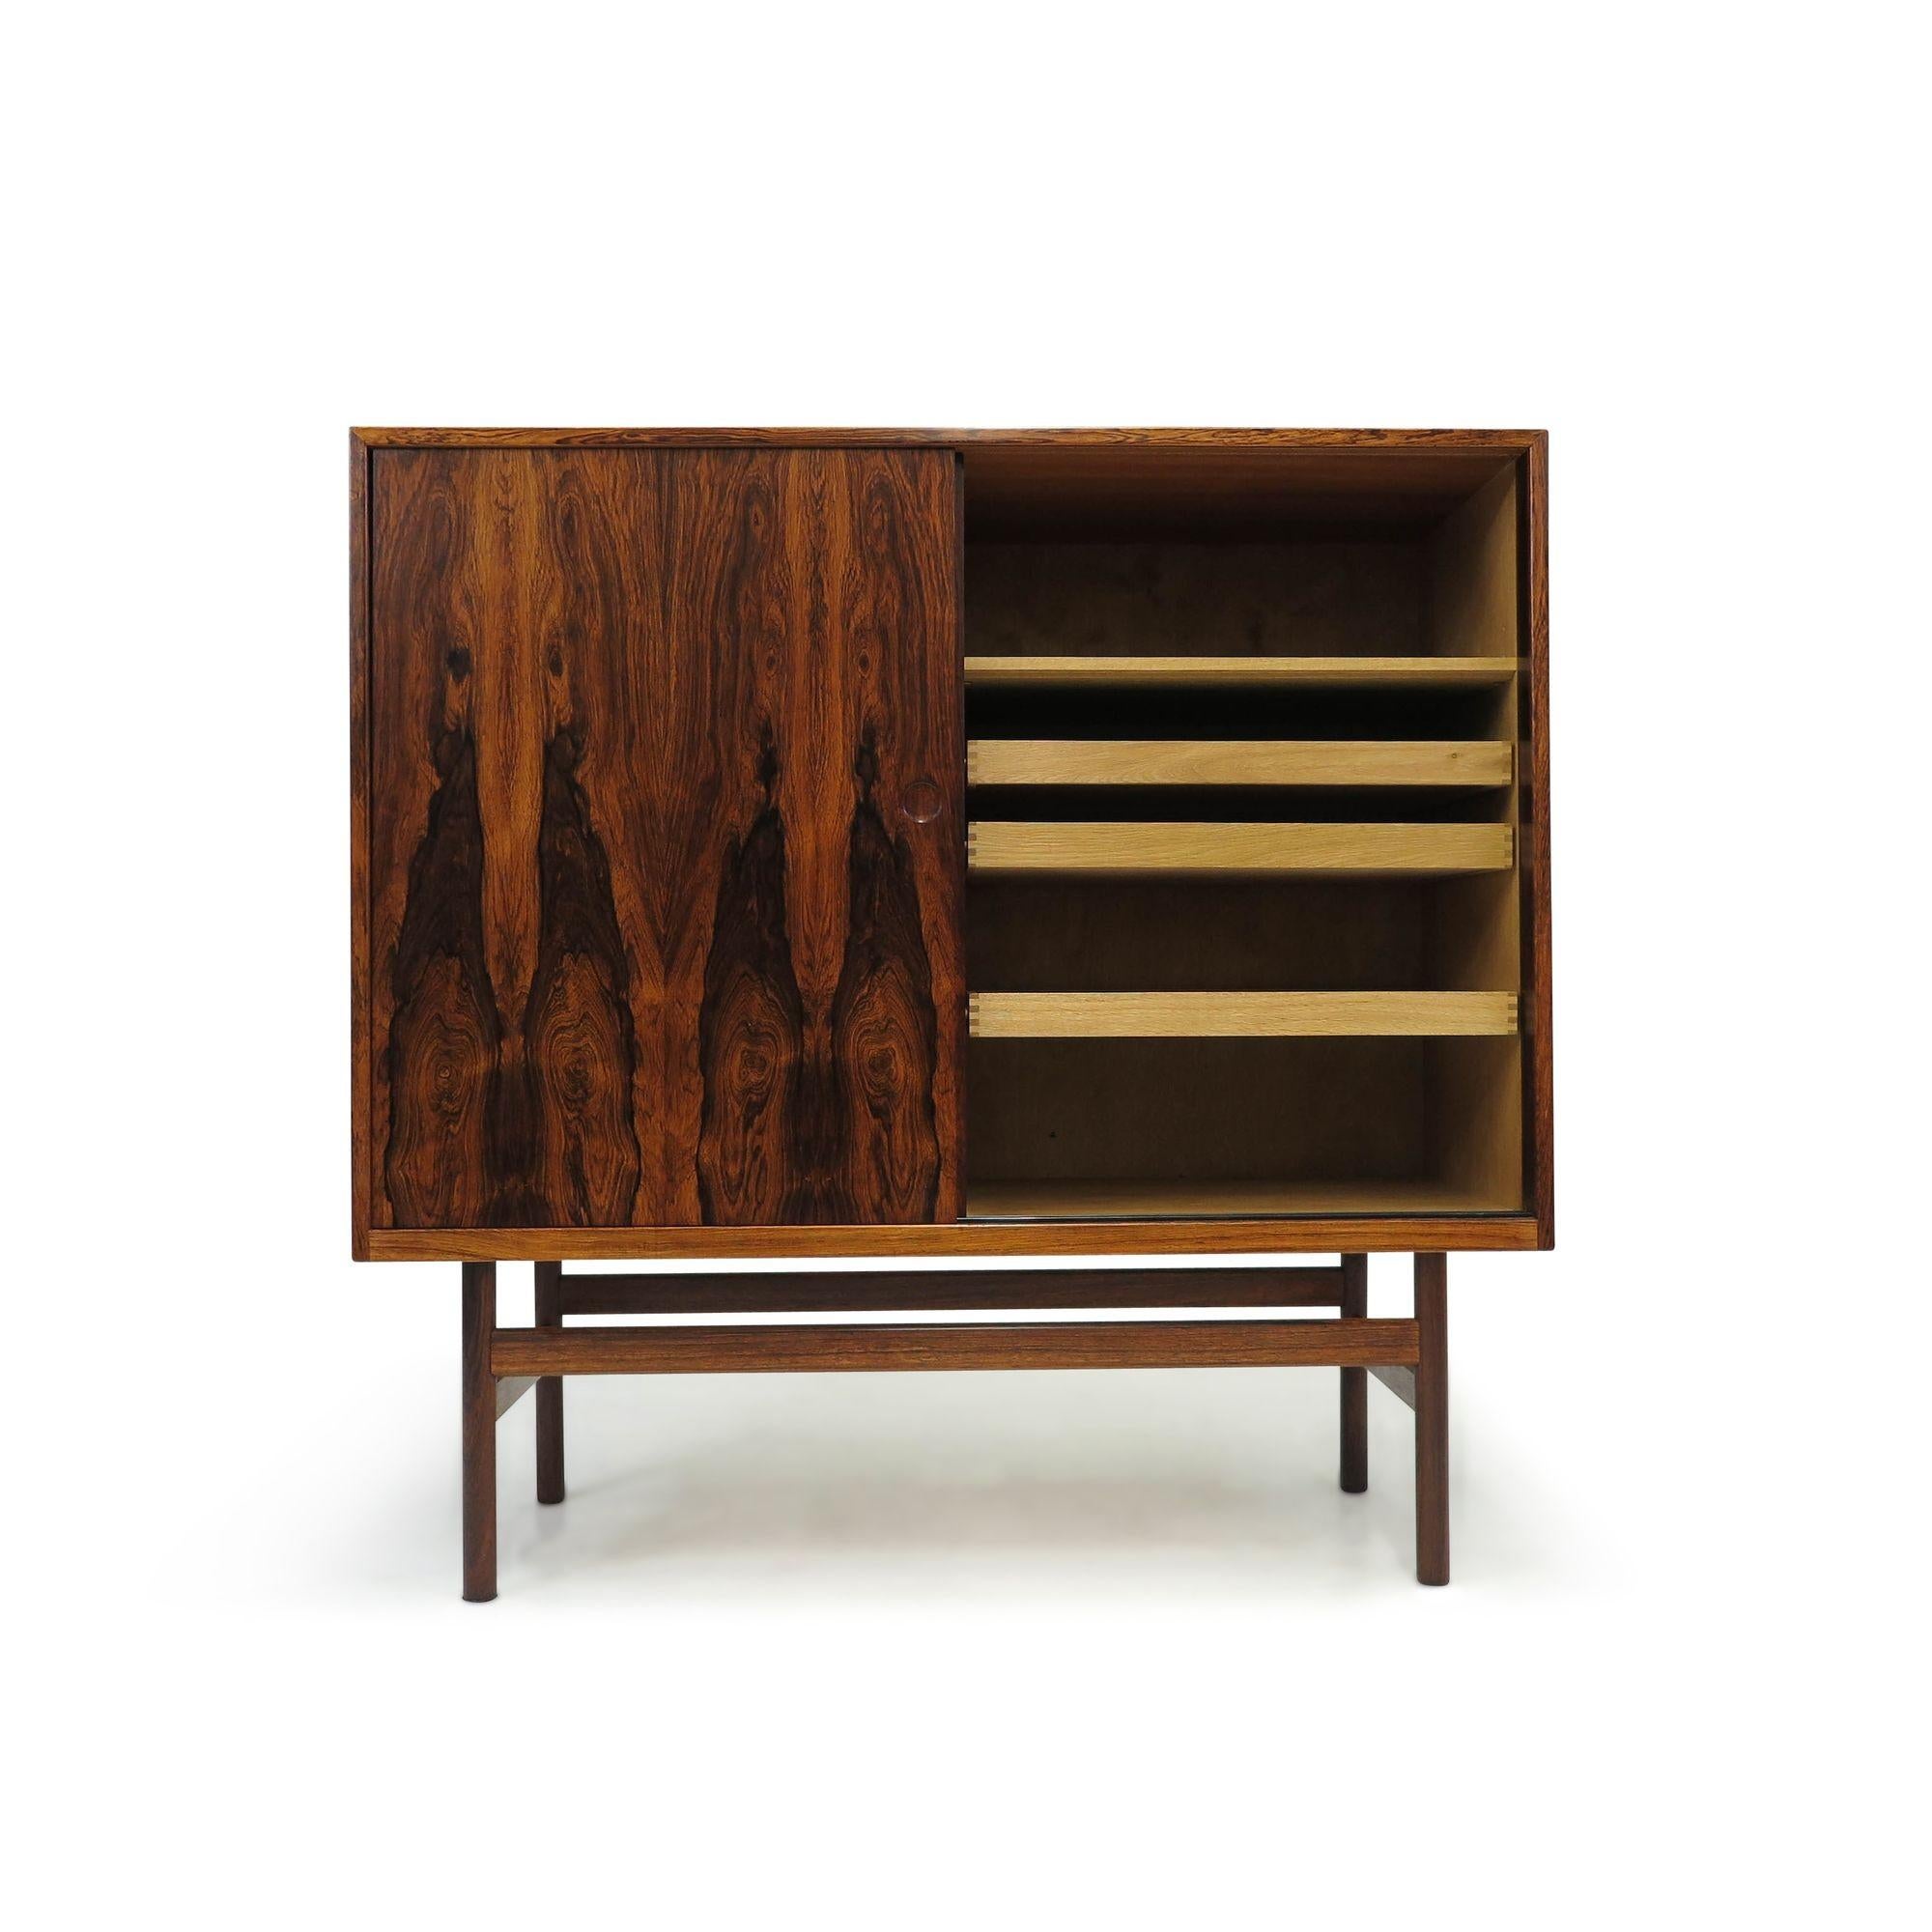 Danish cabinet with stunning book-matched Brazilian rosewood, showcasing dynamic grain patterns on the sliding doors front. The cabinet doors open to reveal a white oak interior with silverware drawers and adjustable shelves. The cabinet stands